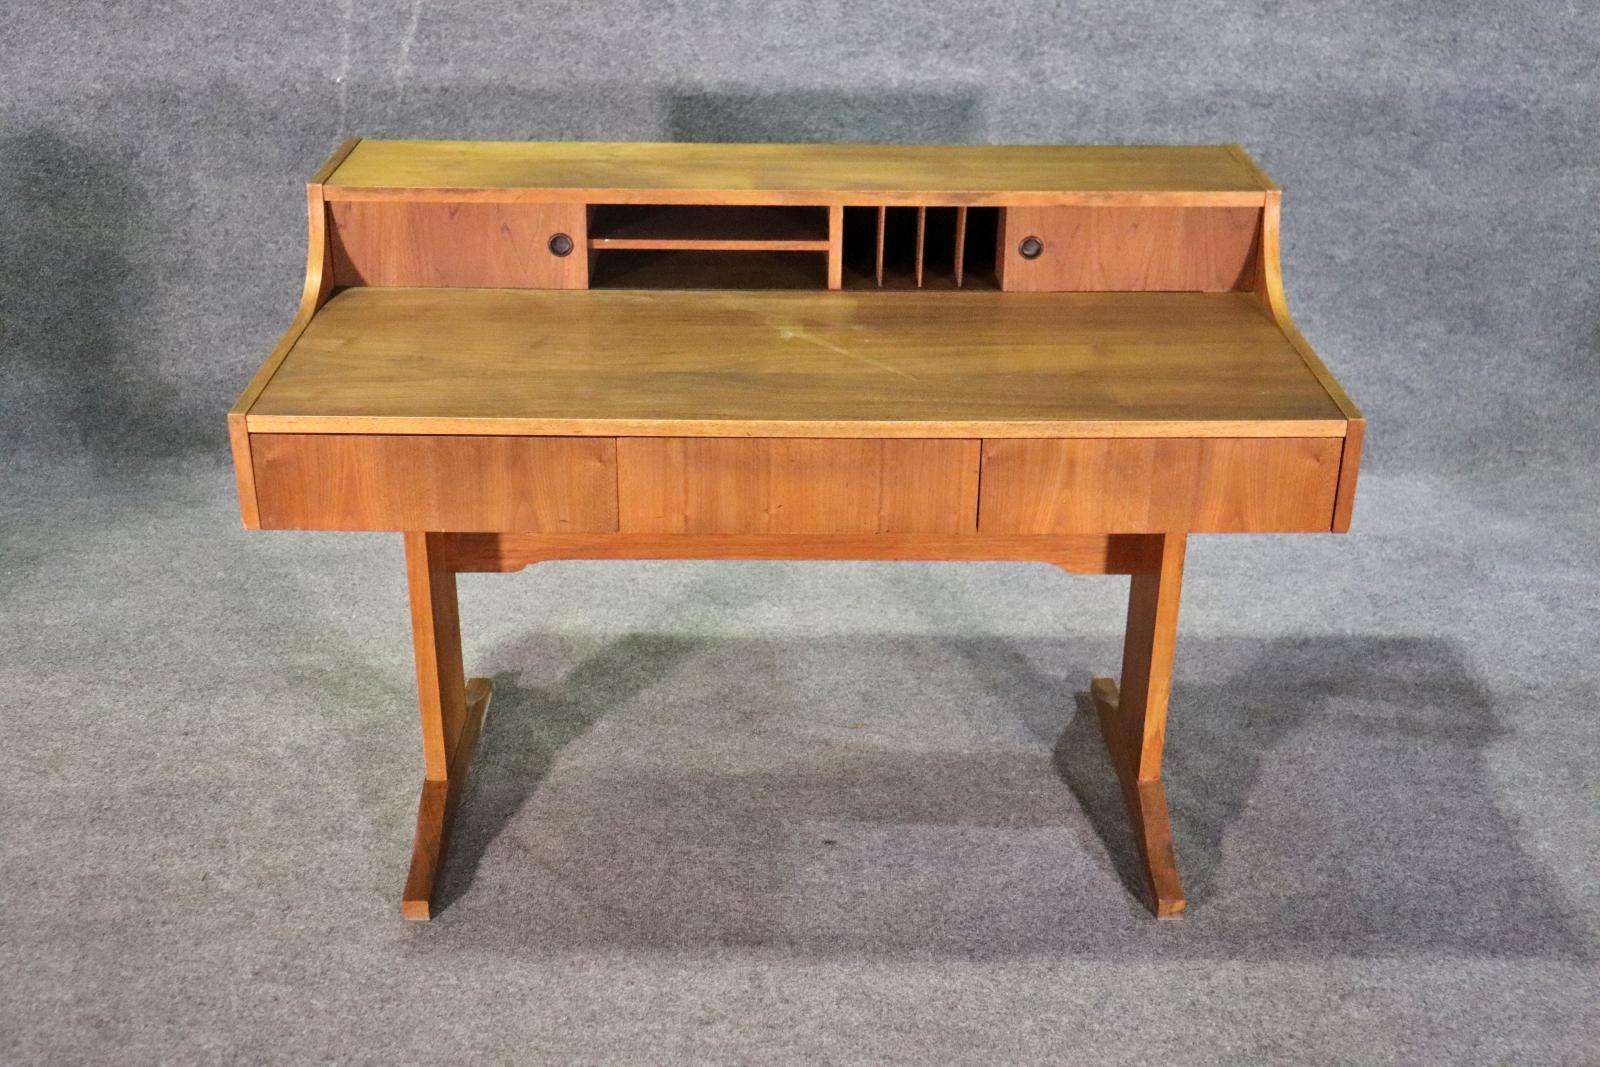 This vintage writing desk made in Denmark features three drawers and plenty of small storage compartments. This desk is normally in a rosewood, so this item is a rare find.
Please confirm location NY or NJ